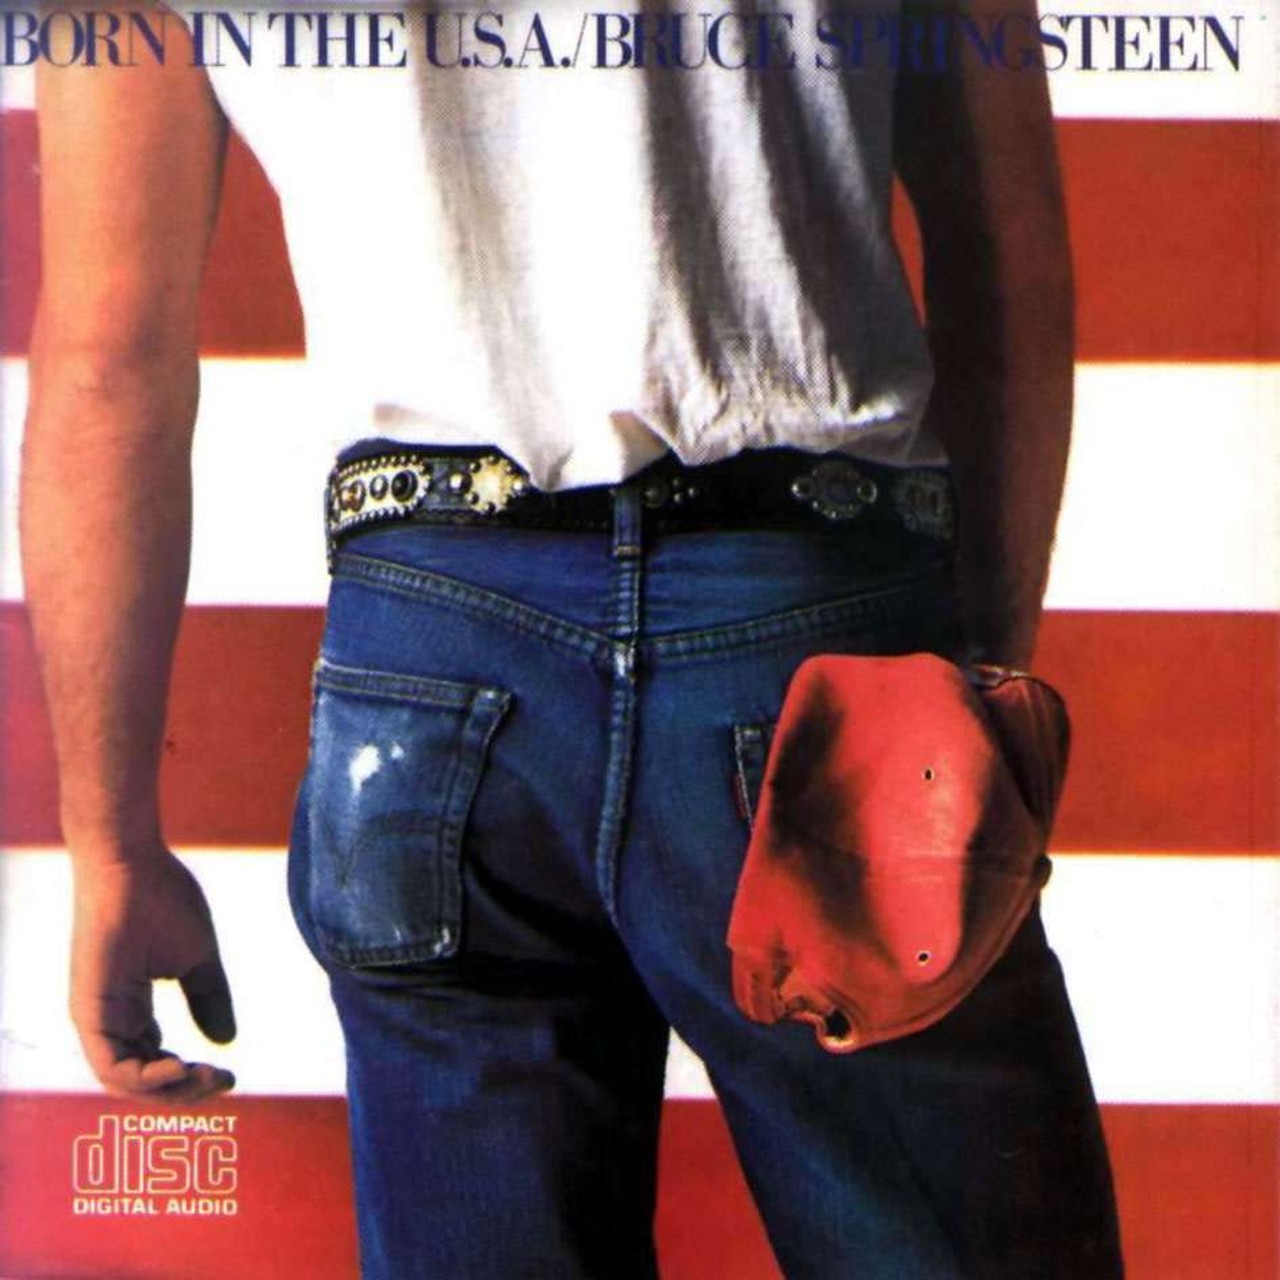 Bruce Springsteen - Born in the U.S.A. (1984)
Arguably the most famous album cover on this list, Born in the U.S.A. by Bruce Springsteen also displays the Boss' backside in addition to the stars-and-stripes. Reagan's campaign famously used the title track in his re-election campaign, not knowing Springsteen's political leanings went the other way.